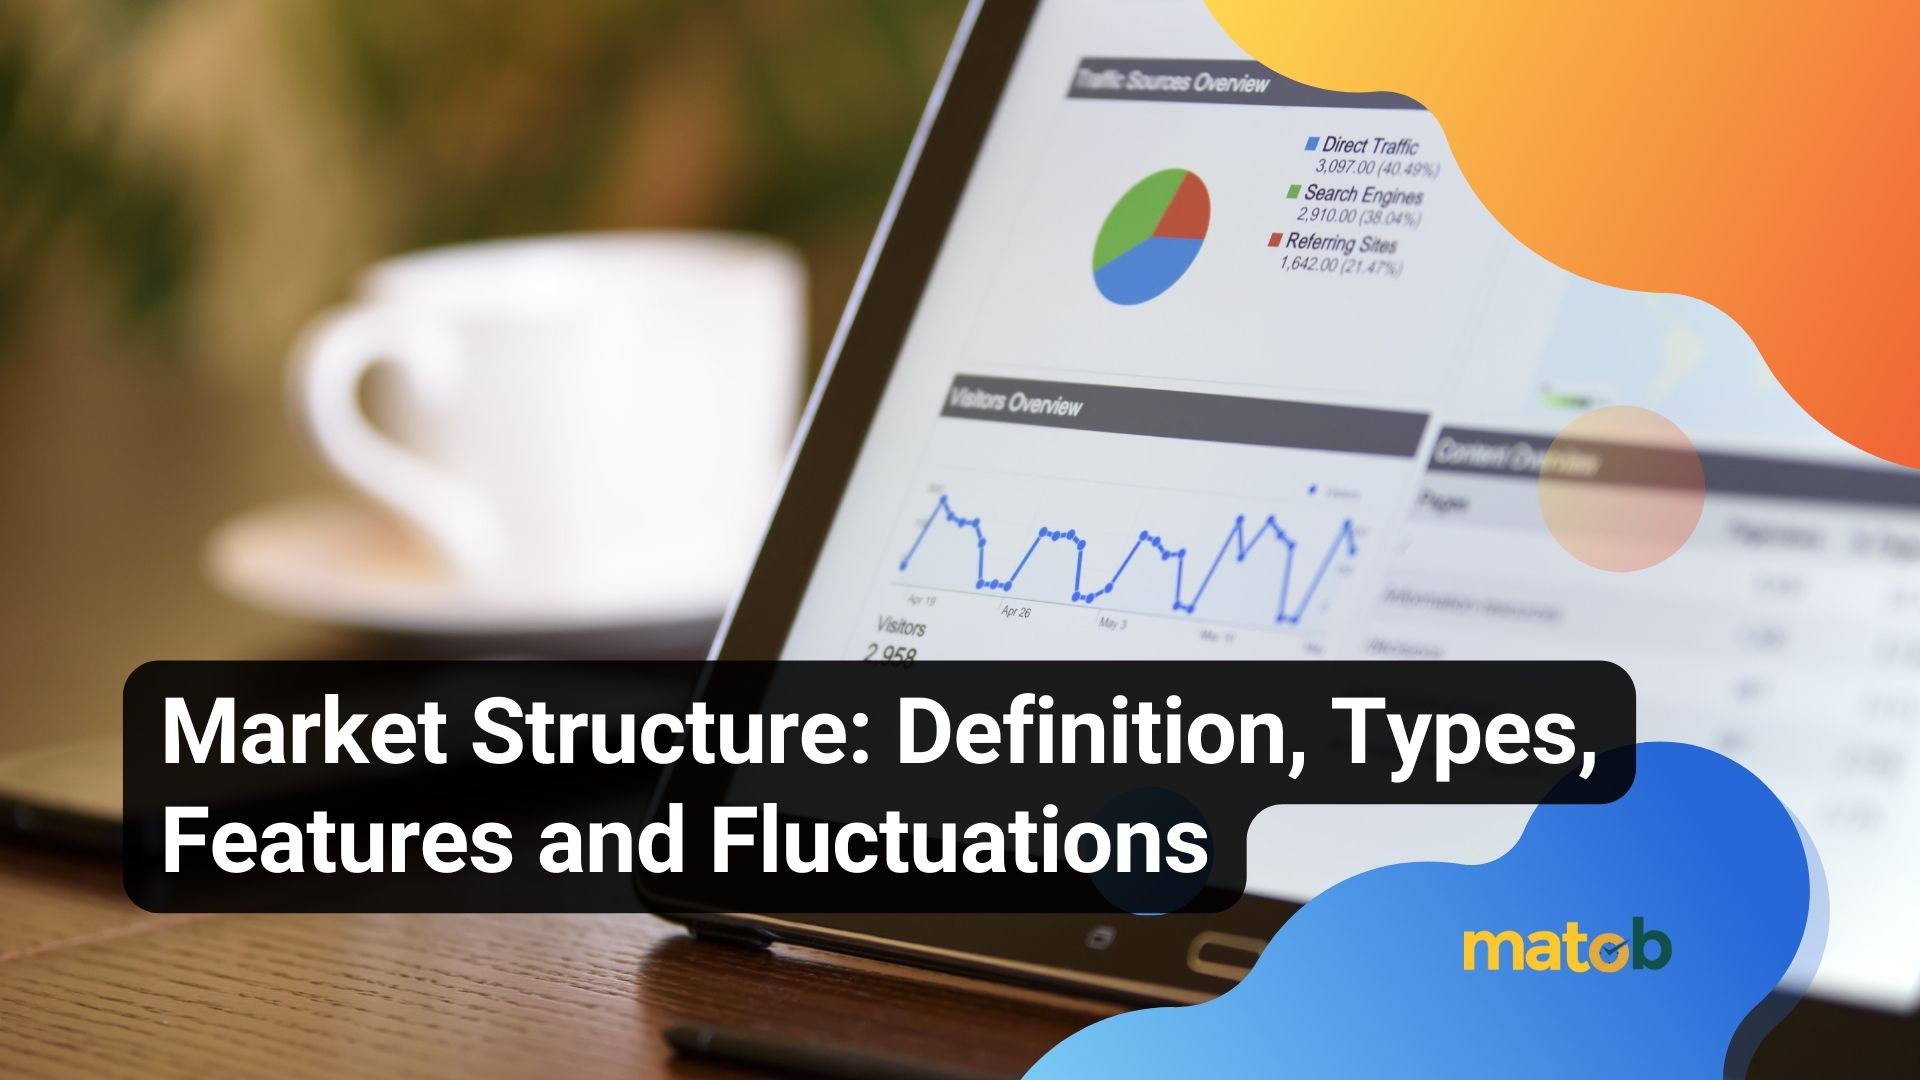 Market Structure: Definition, Types, Features and Fluctuations